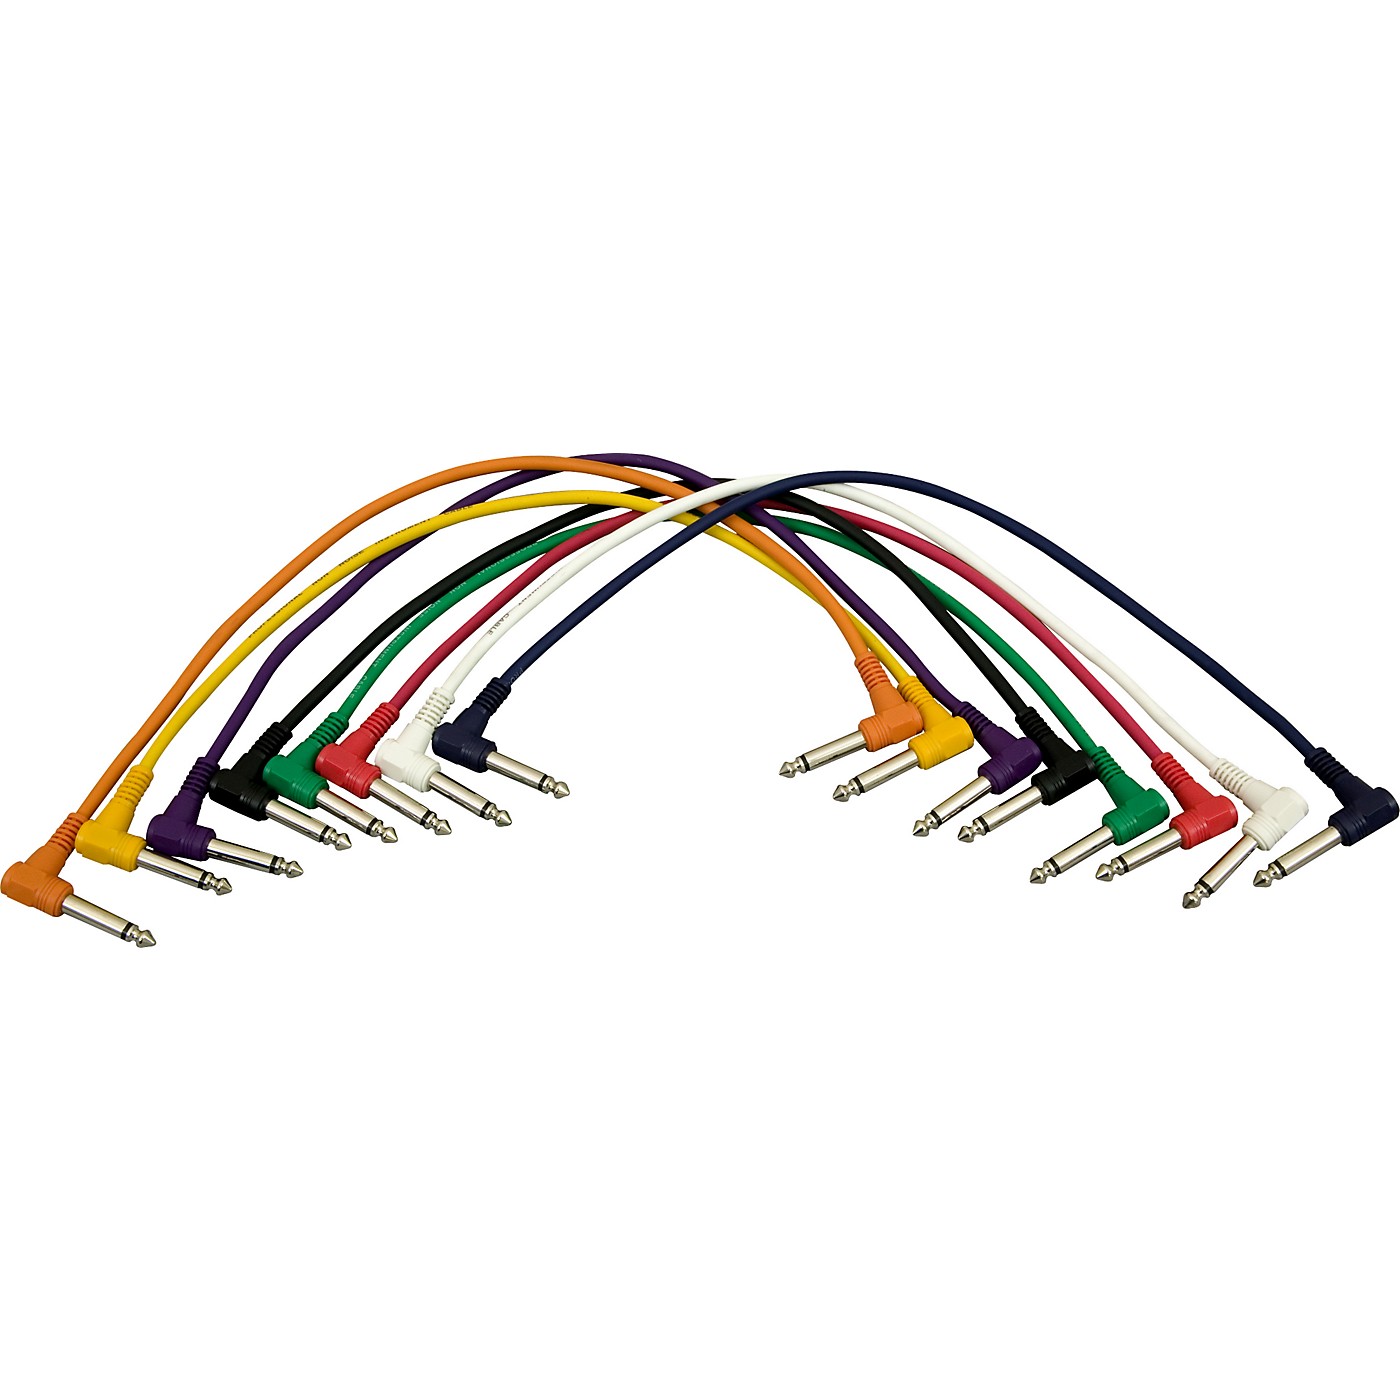 Musician's Gear 1/4 - 1/4 Patch Cable 8-Pack (17